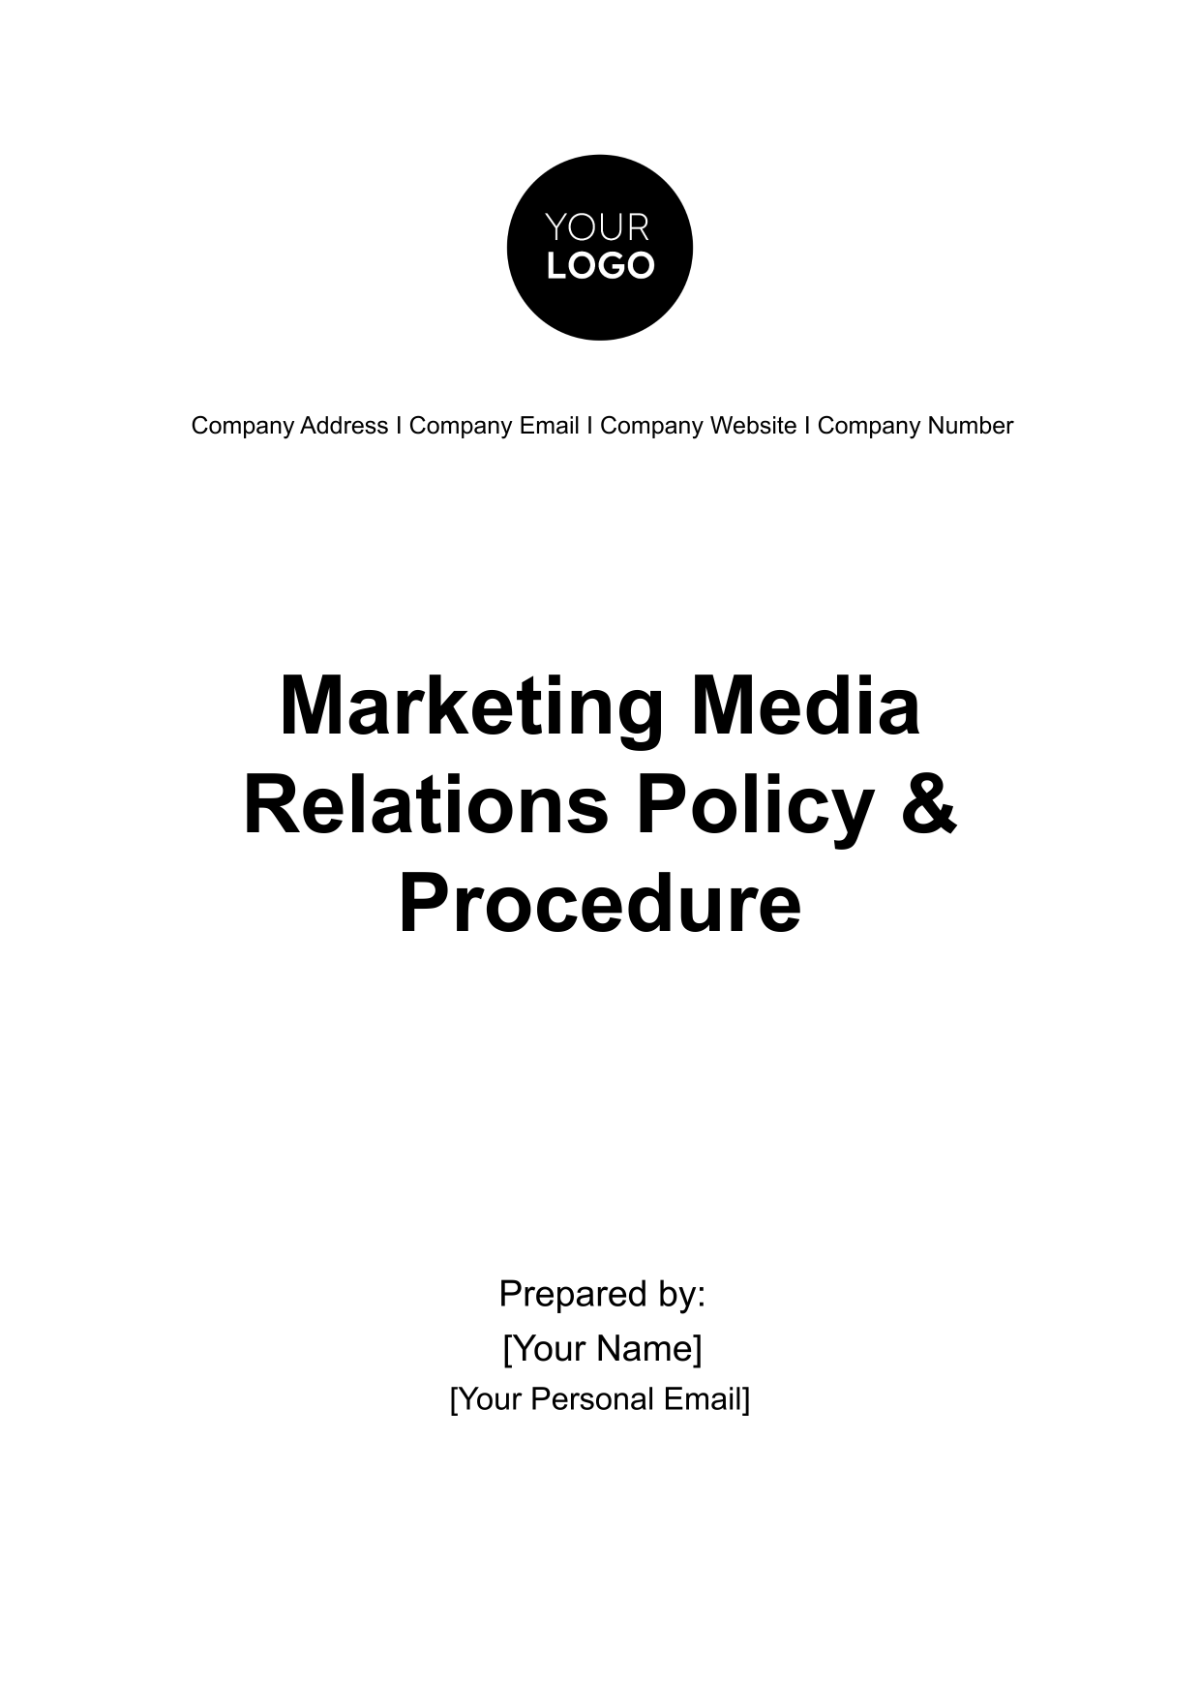 Marketing Media Relations Policy & Procedure Template